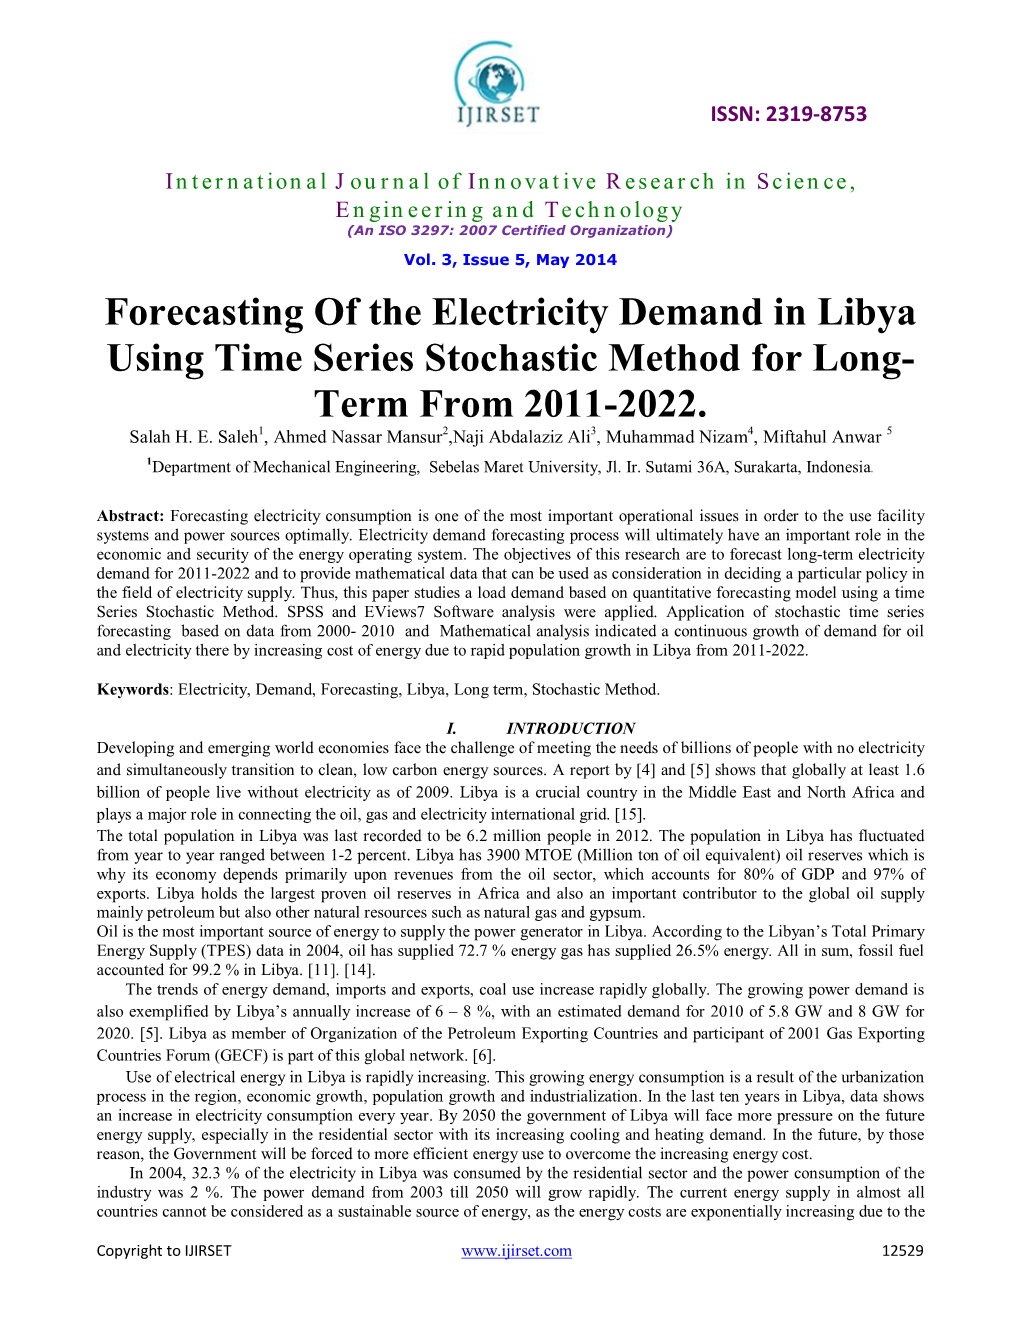 Forecasting of the Electricity Demand in Libya Using Time Series Stochastic Method for Long- Term from 2011-2022